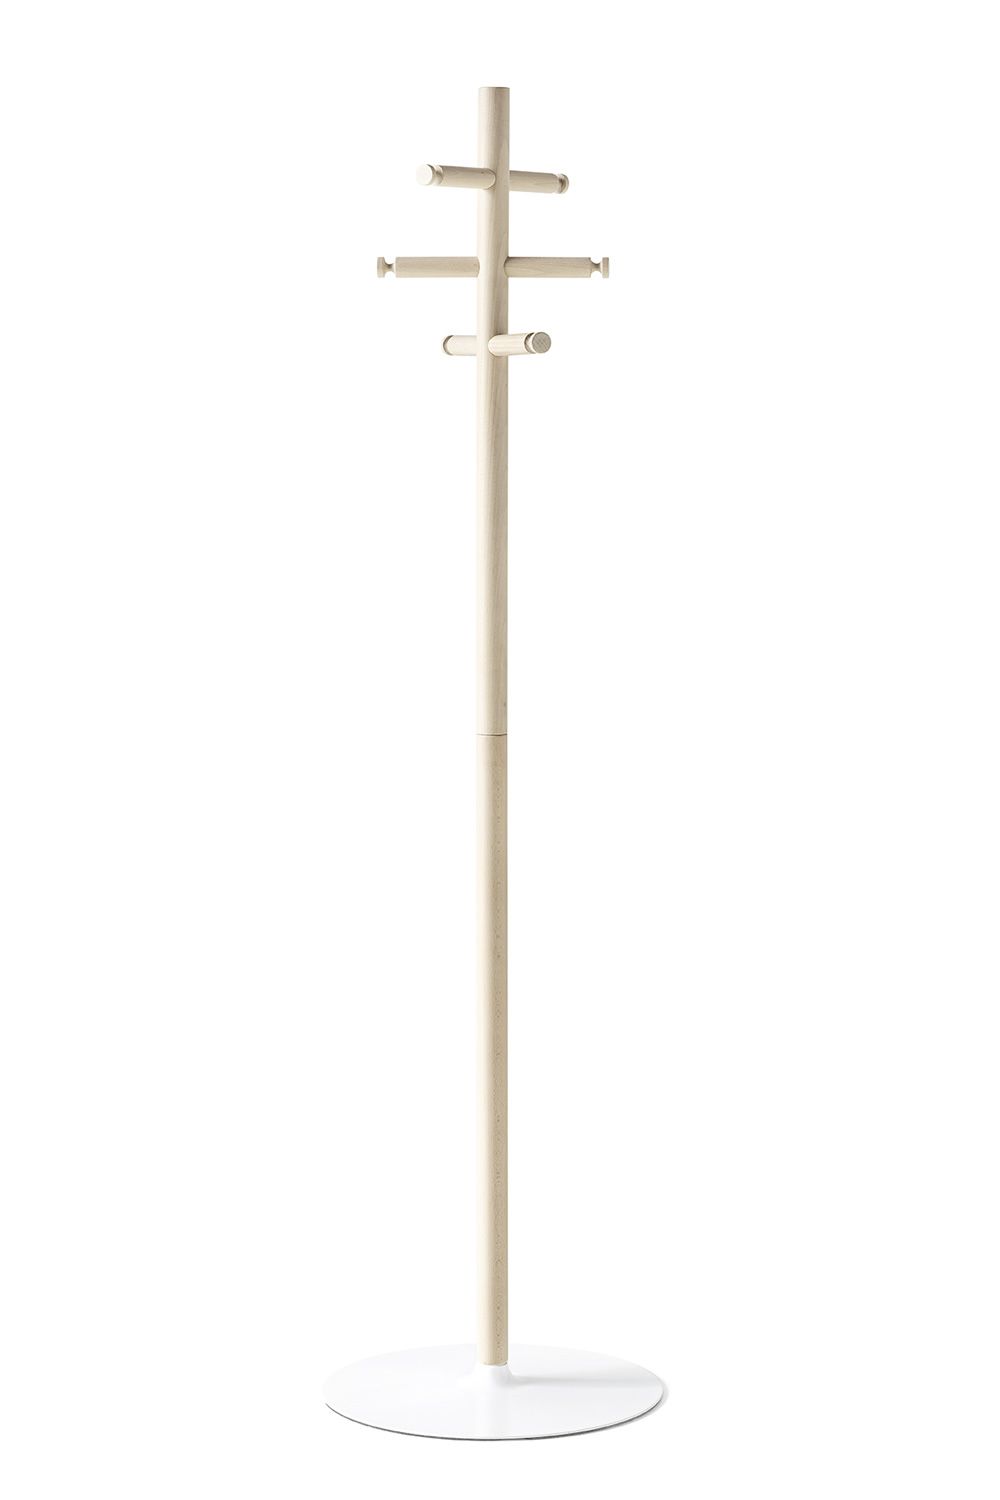 cb5212 app connubia coat rack with structure in whitened colour and white base - Suport pentru haine App CONNUBIA (CB/5212)